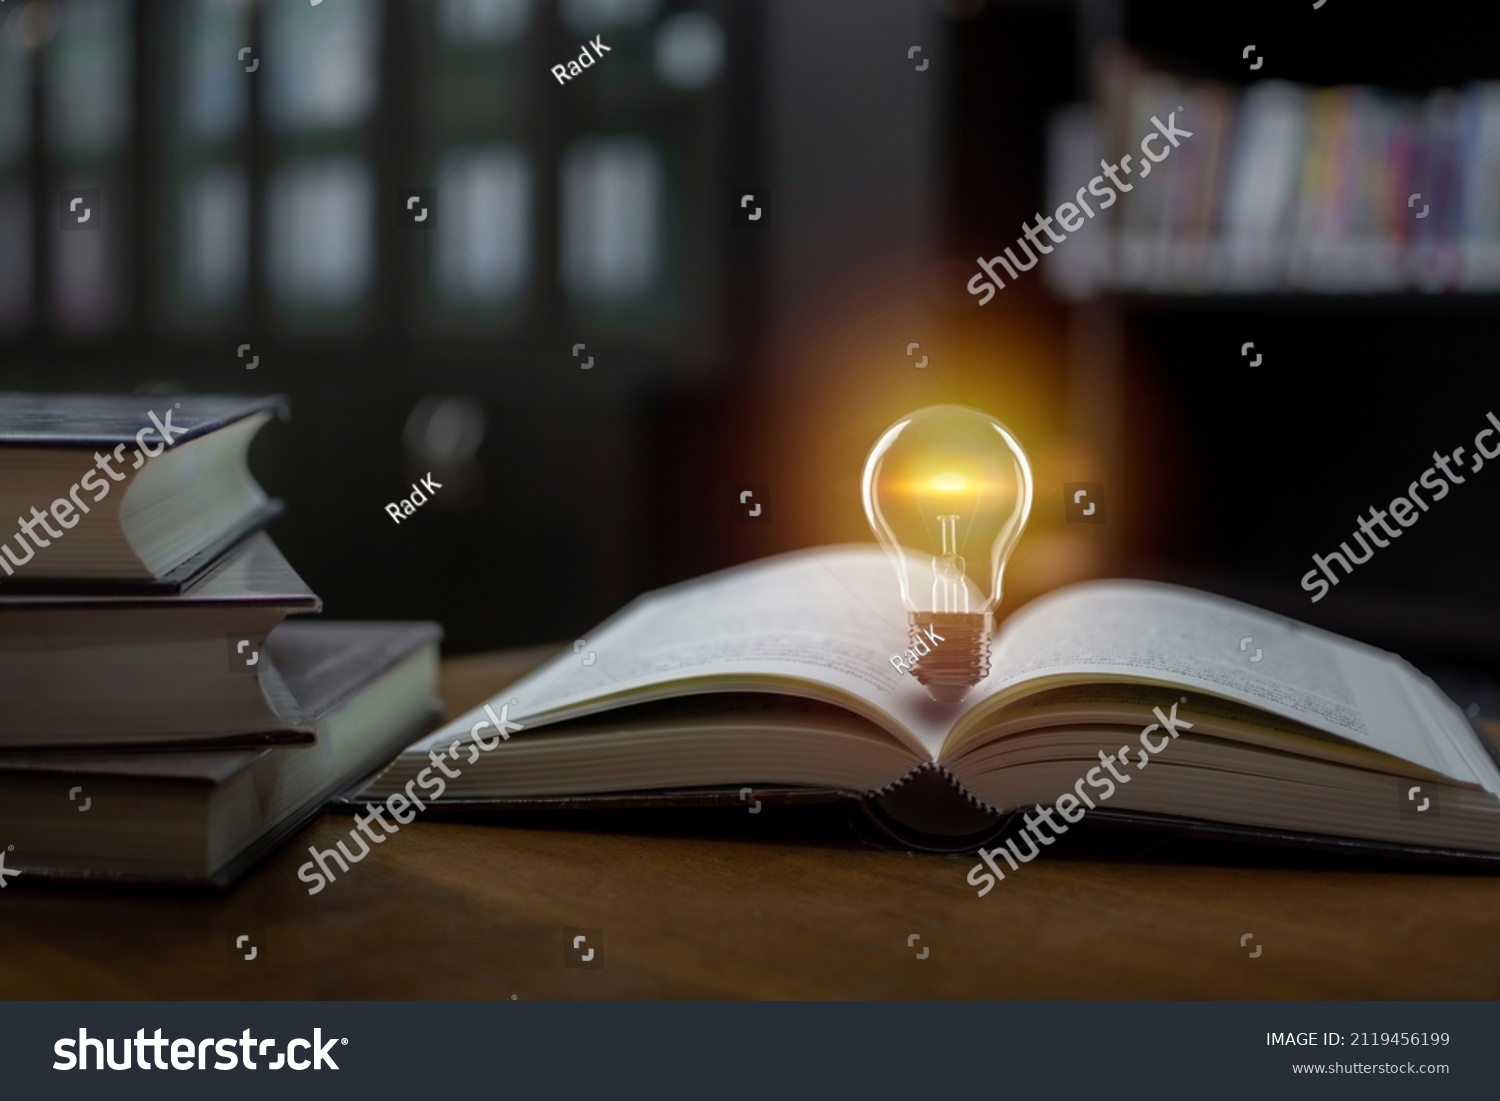 Light bulb on the open book, Idea concept for innovation idea, power of knowledge, power of reading, Self-learning, and education knowledge. #2119456199